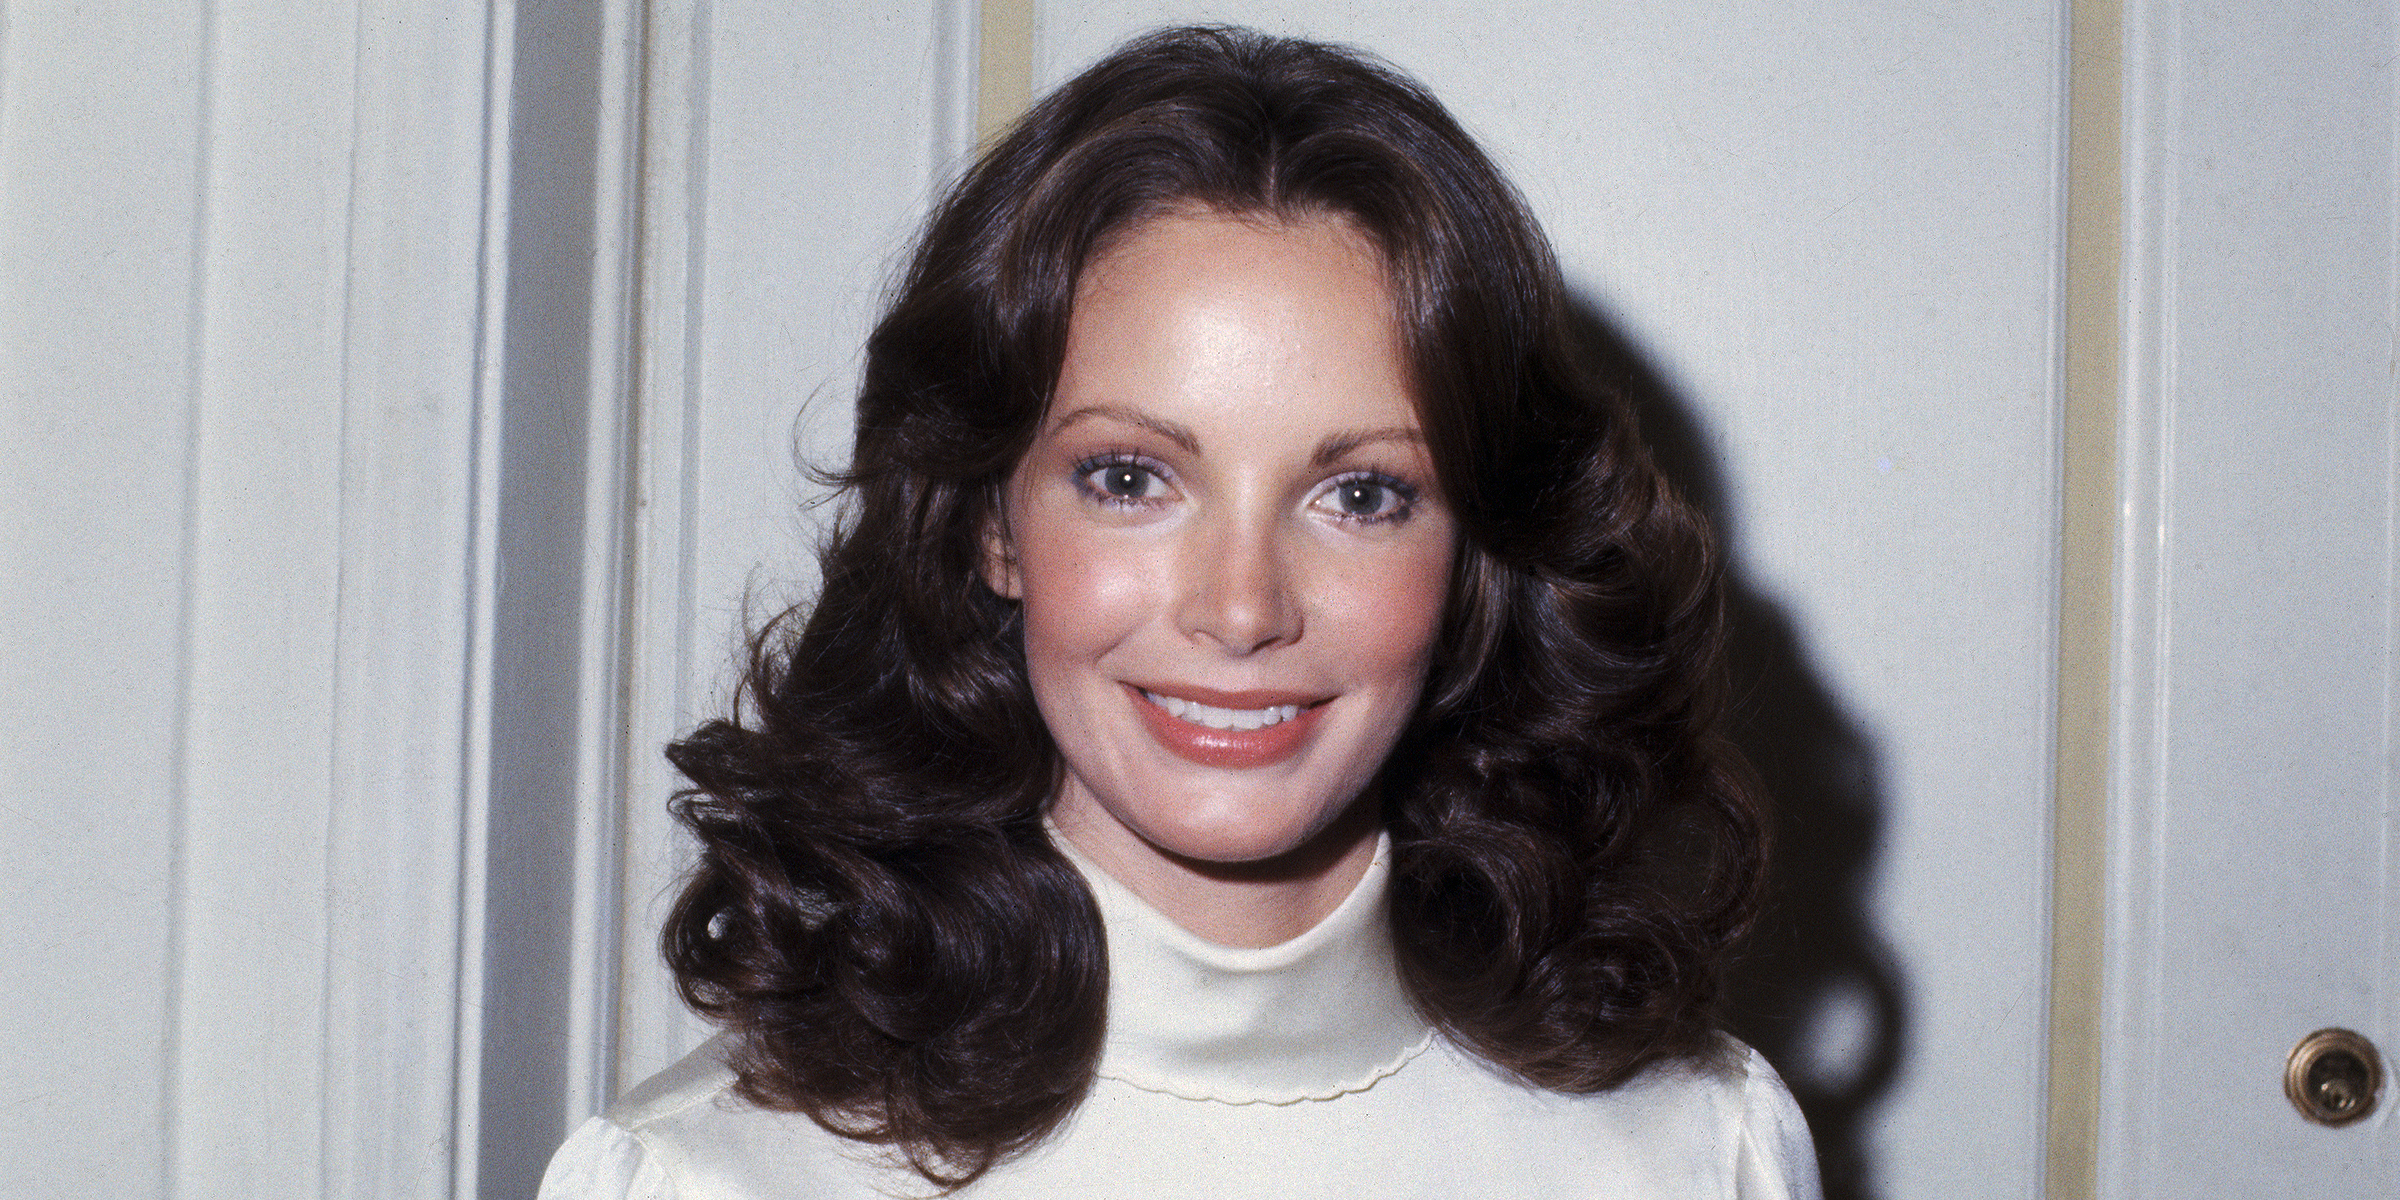 Jaclyn Smith | Source: Getty Images